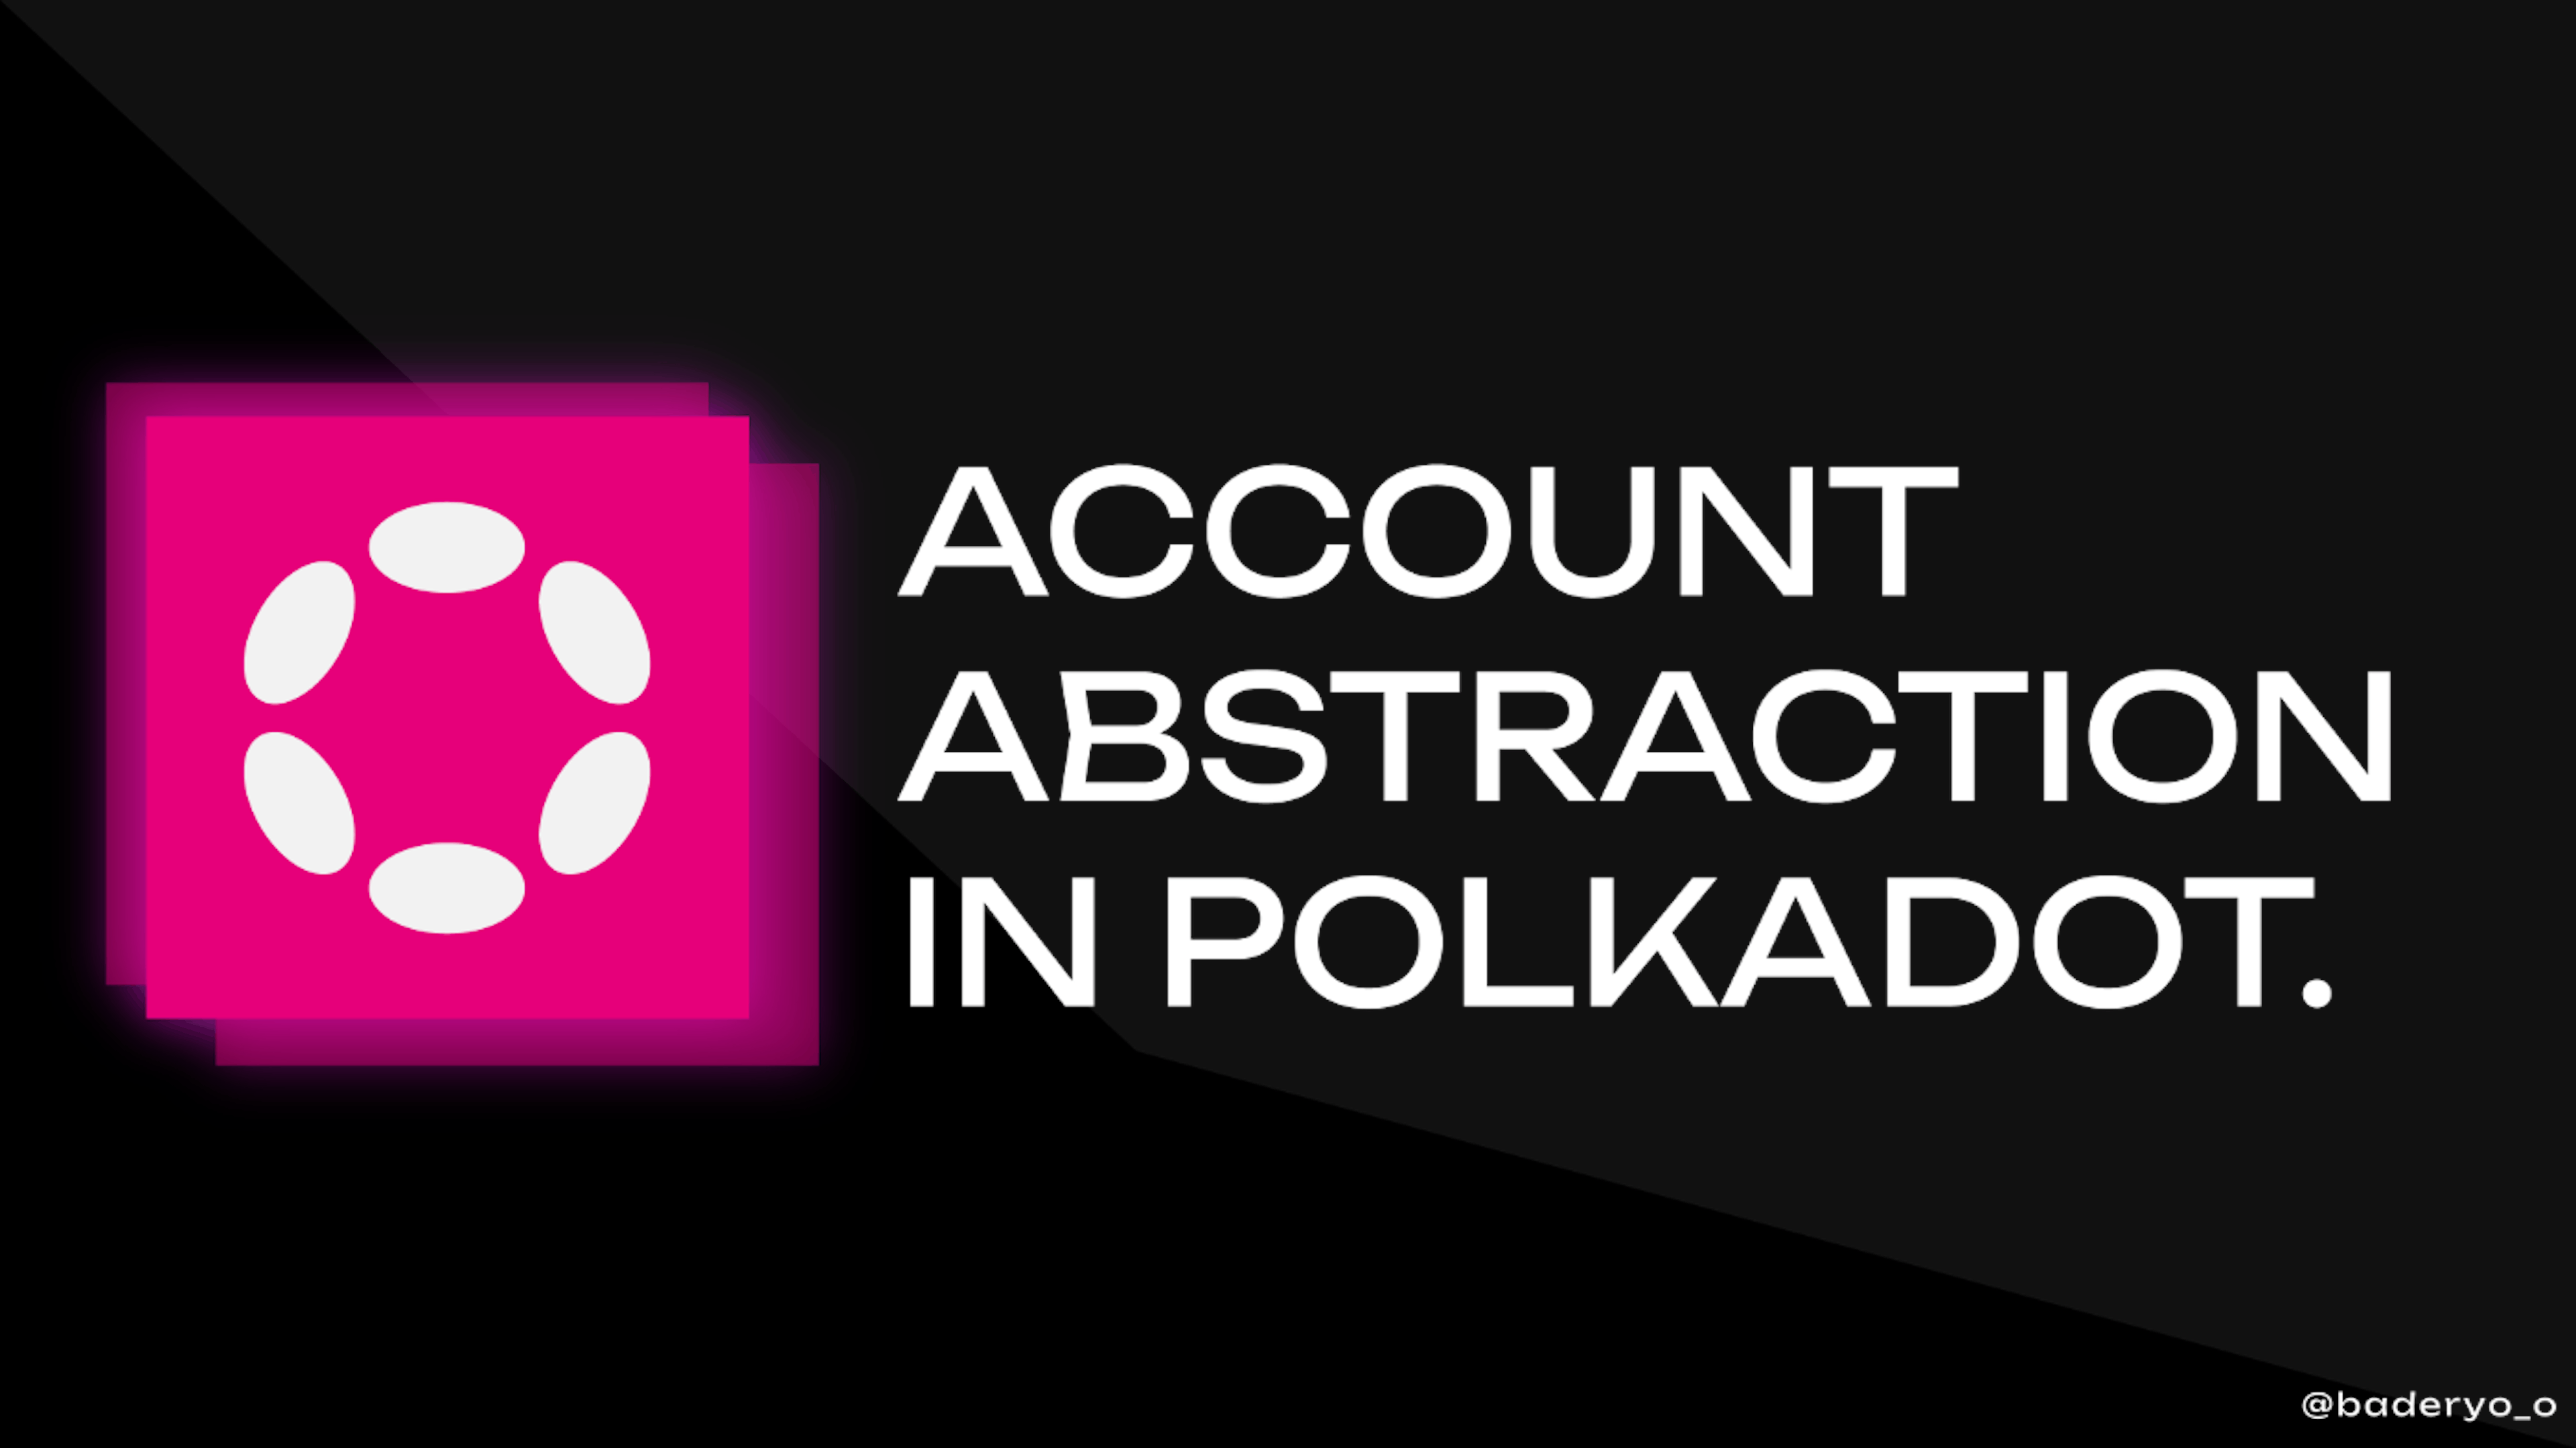 featured image - Abstracting Away Account Abstraction on Polkadot